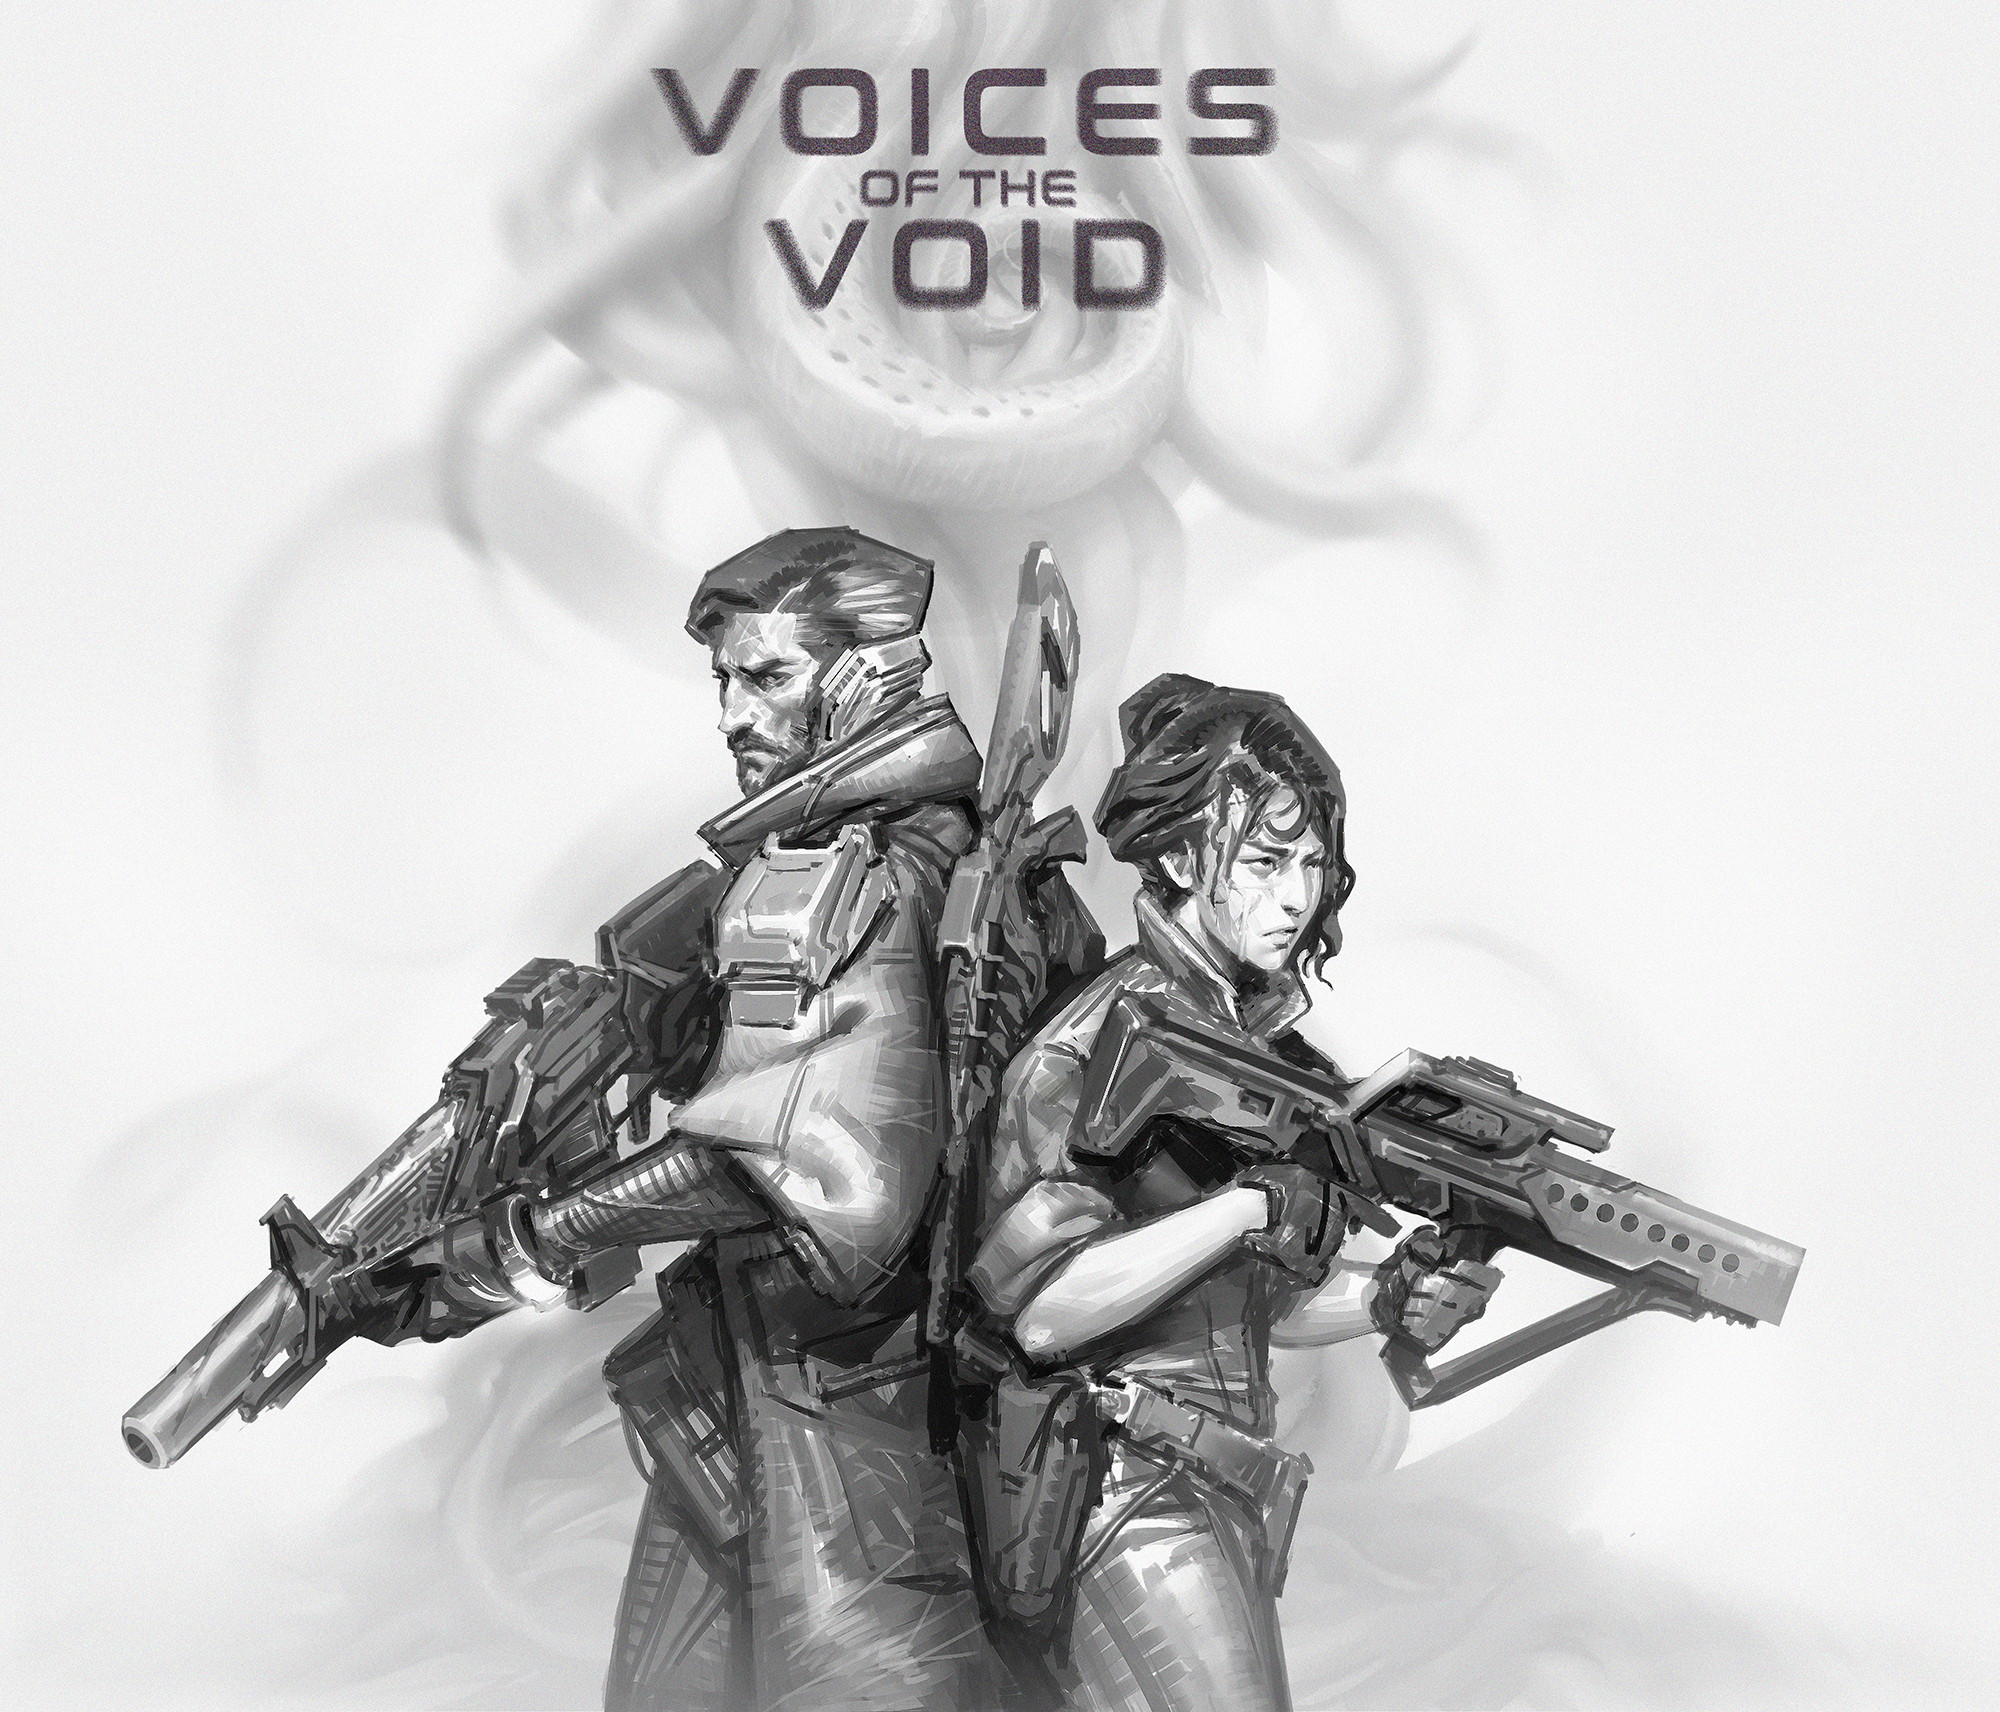 Войсес оф зе войд русификатор. Voices of the Void. Voices of the Void Argemia. Voices of the Void игра. Voices of the Void kerfus.